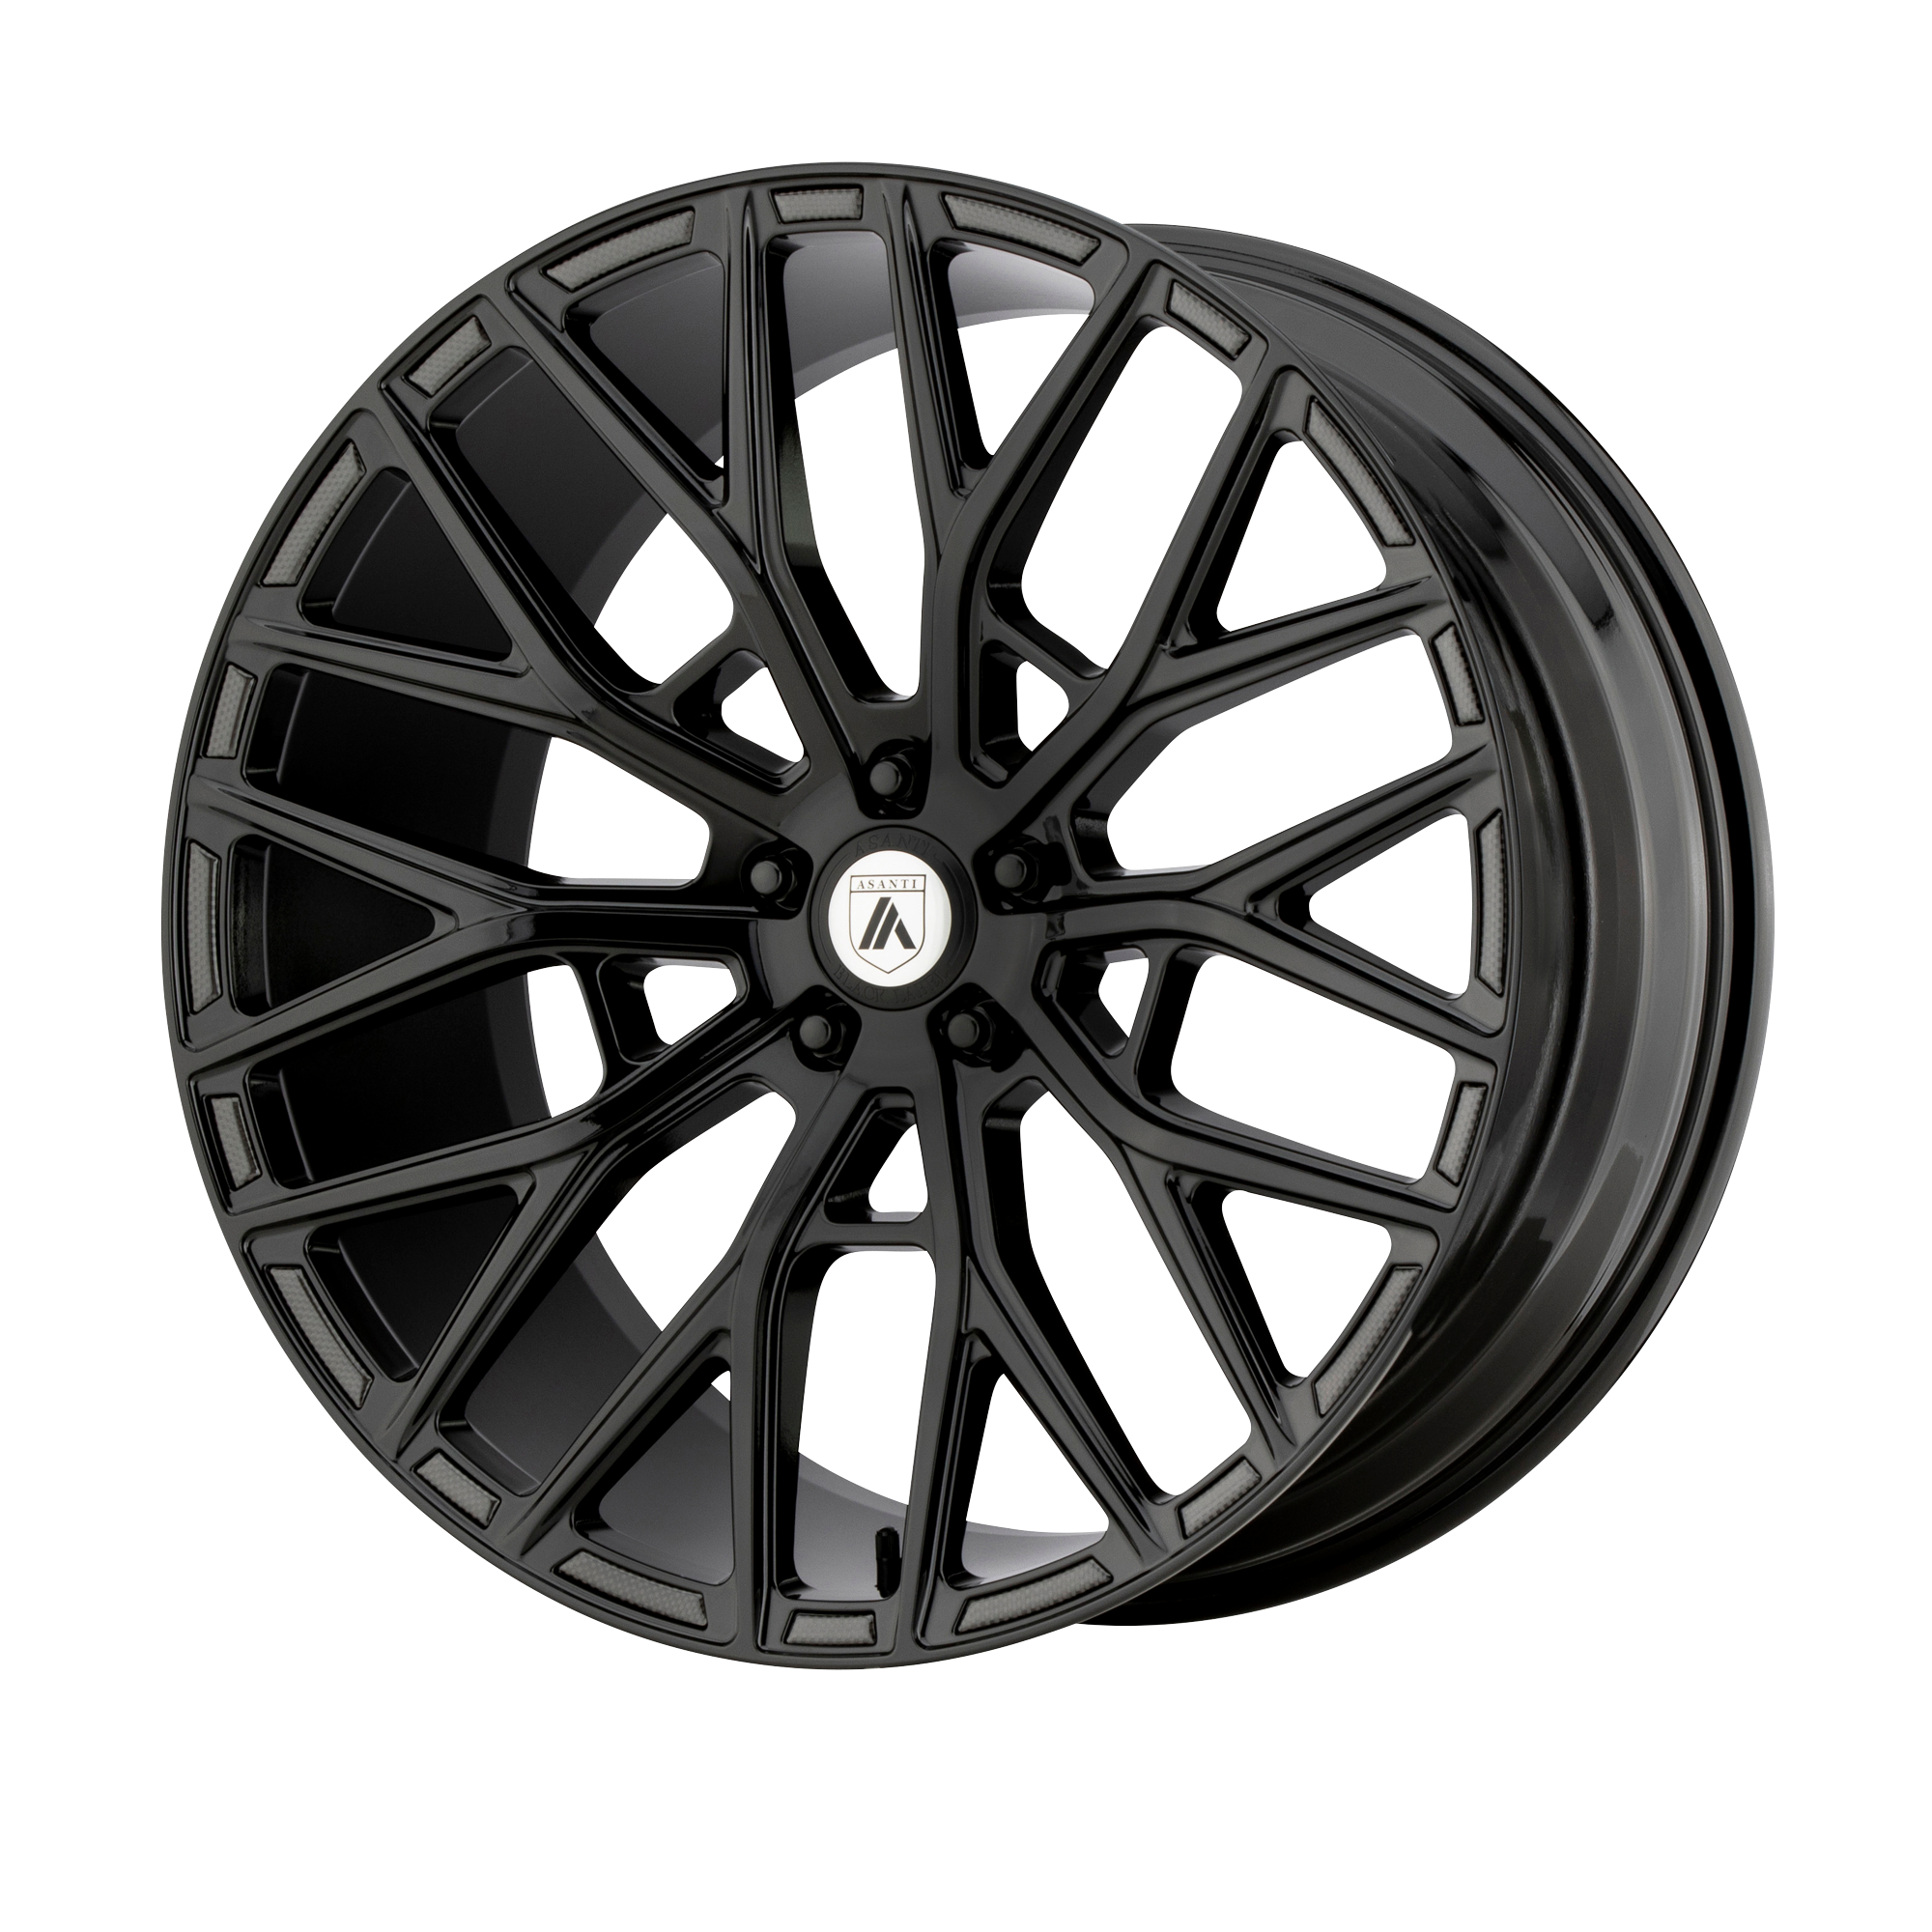 LEO 20x8.5 Blank GLOSS BLACK (38 mm) - Tires and Engine Performance